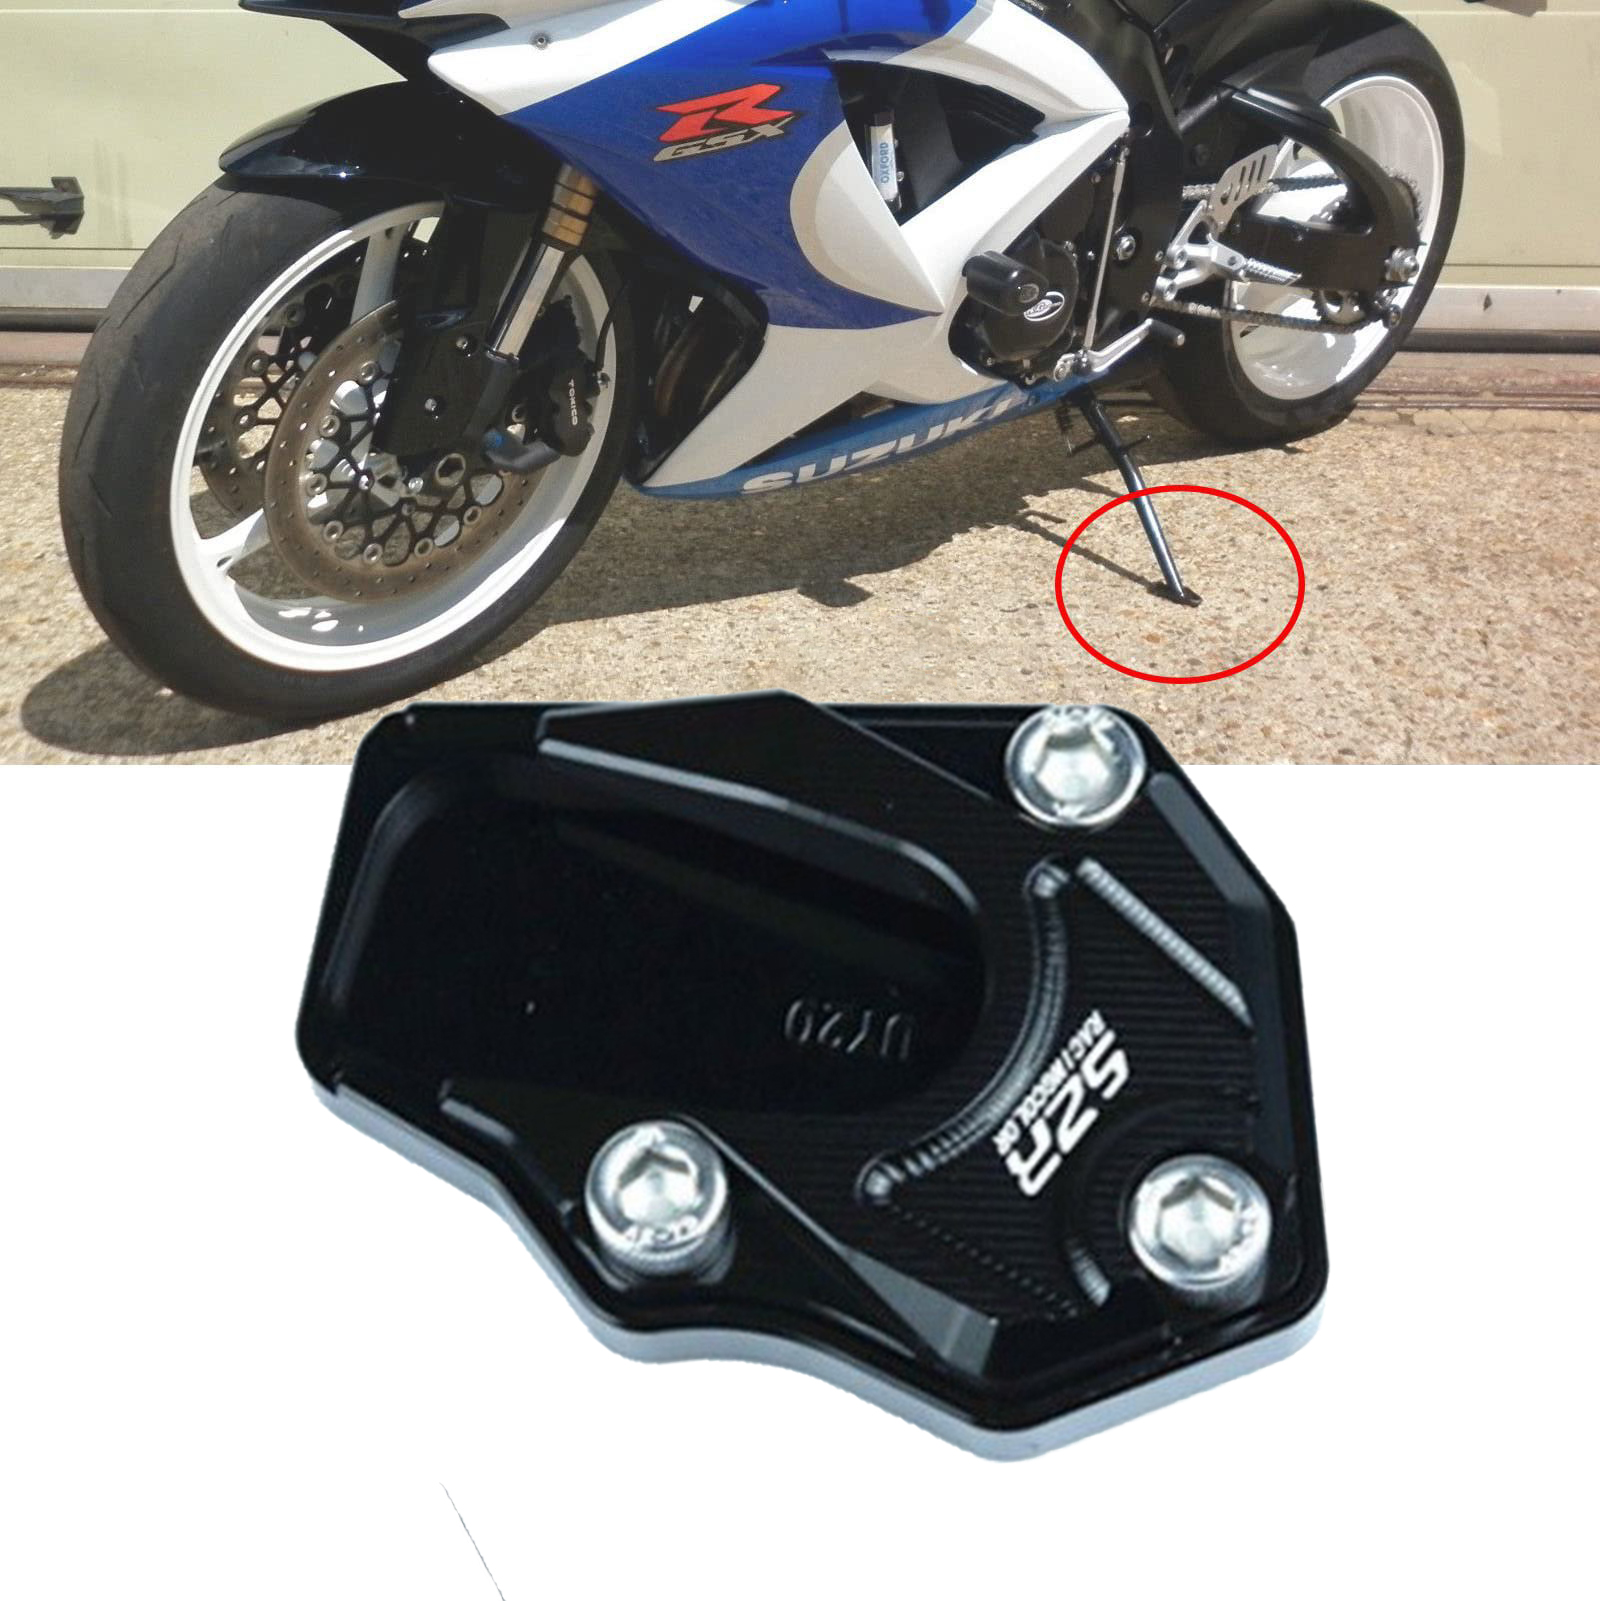 Motorcycle support frame stainless steel alloy foot pads